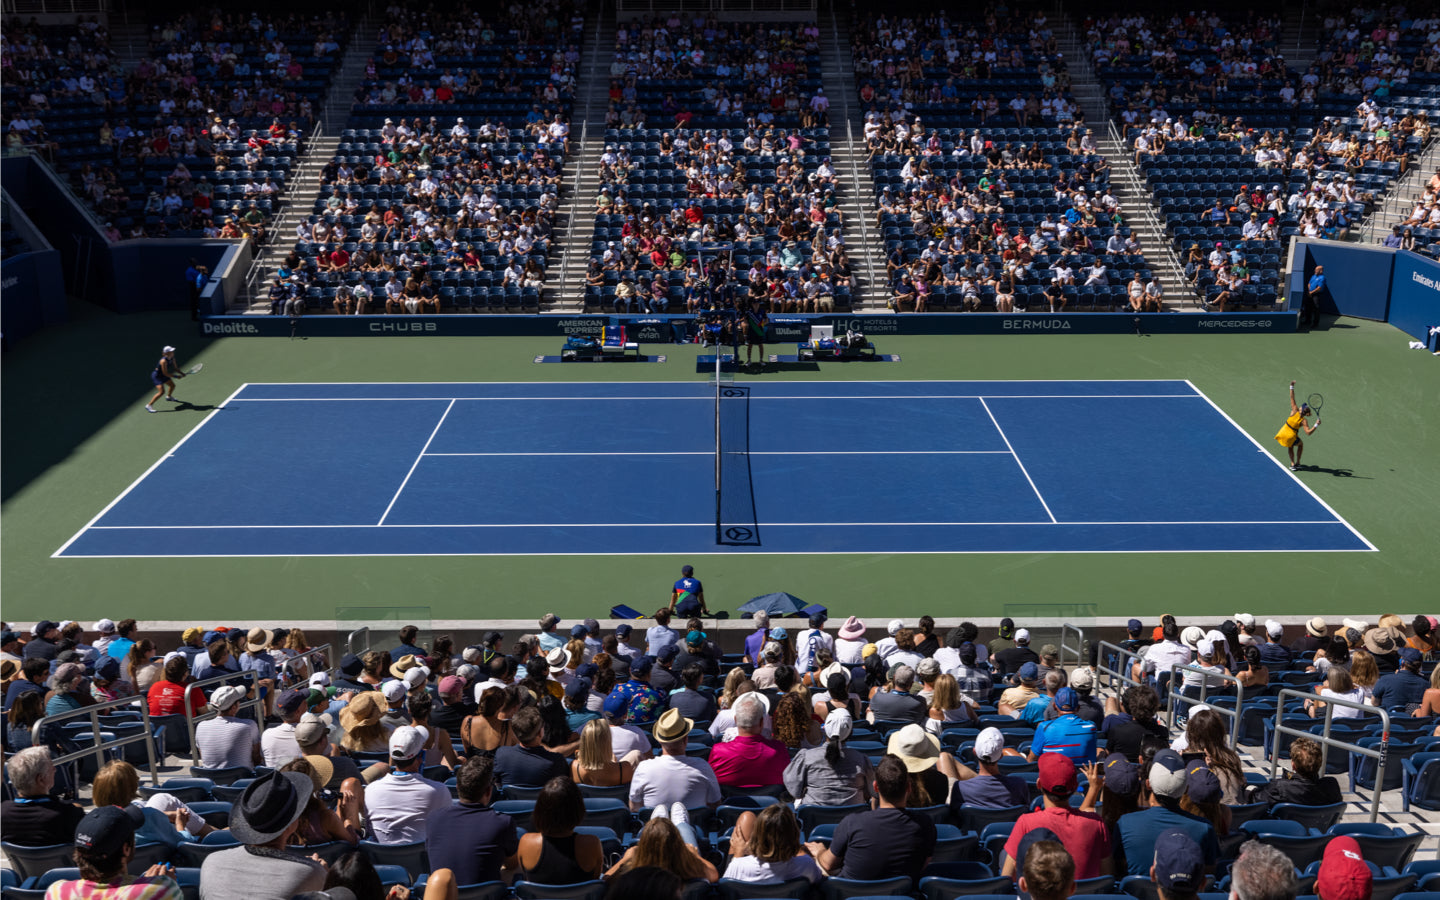 A Tennis Match During the US Open